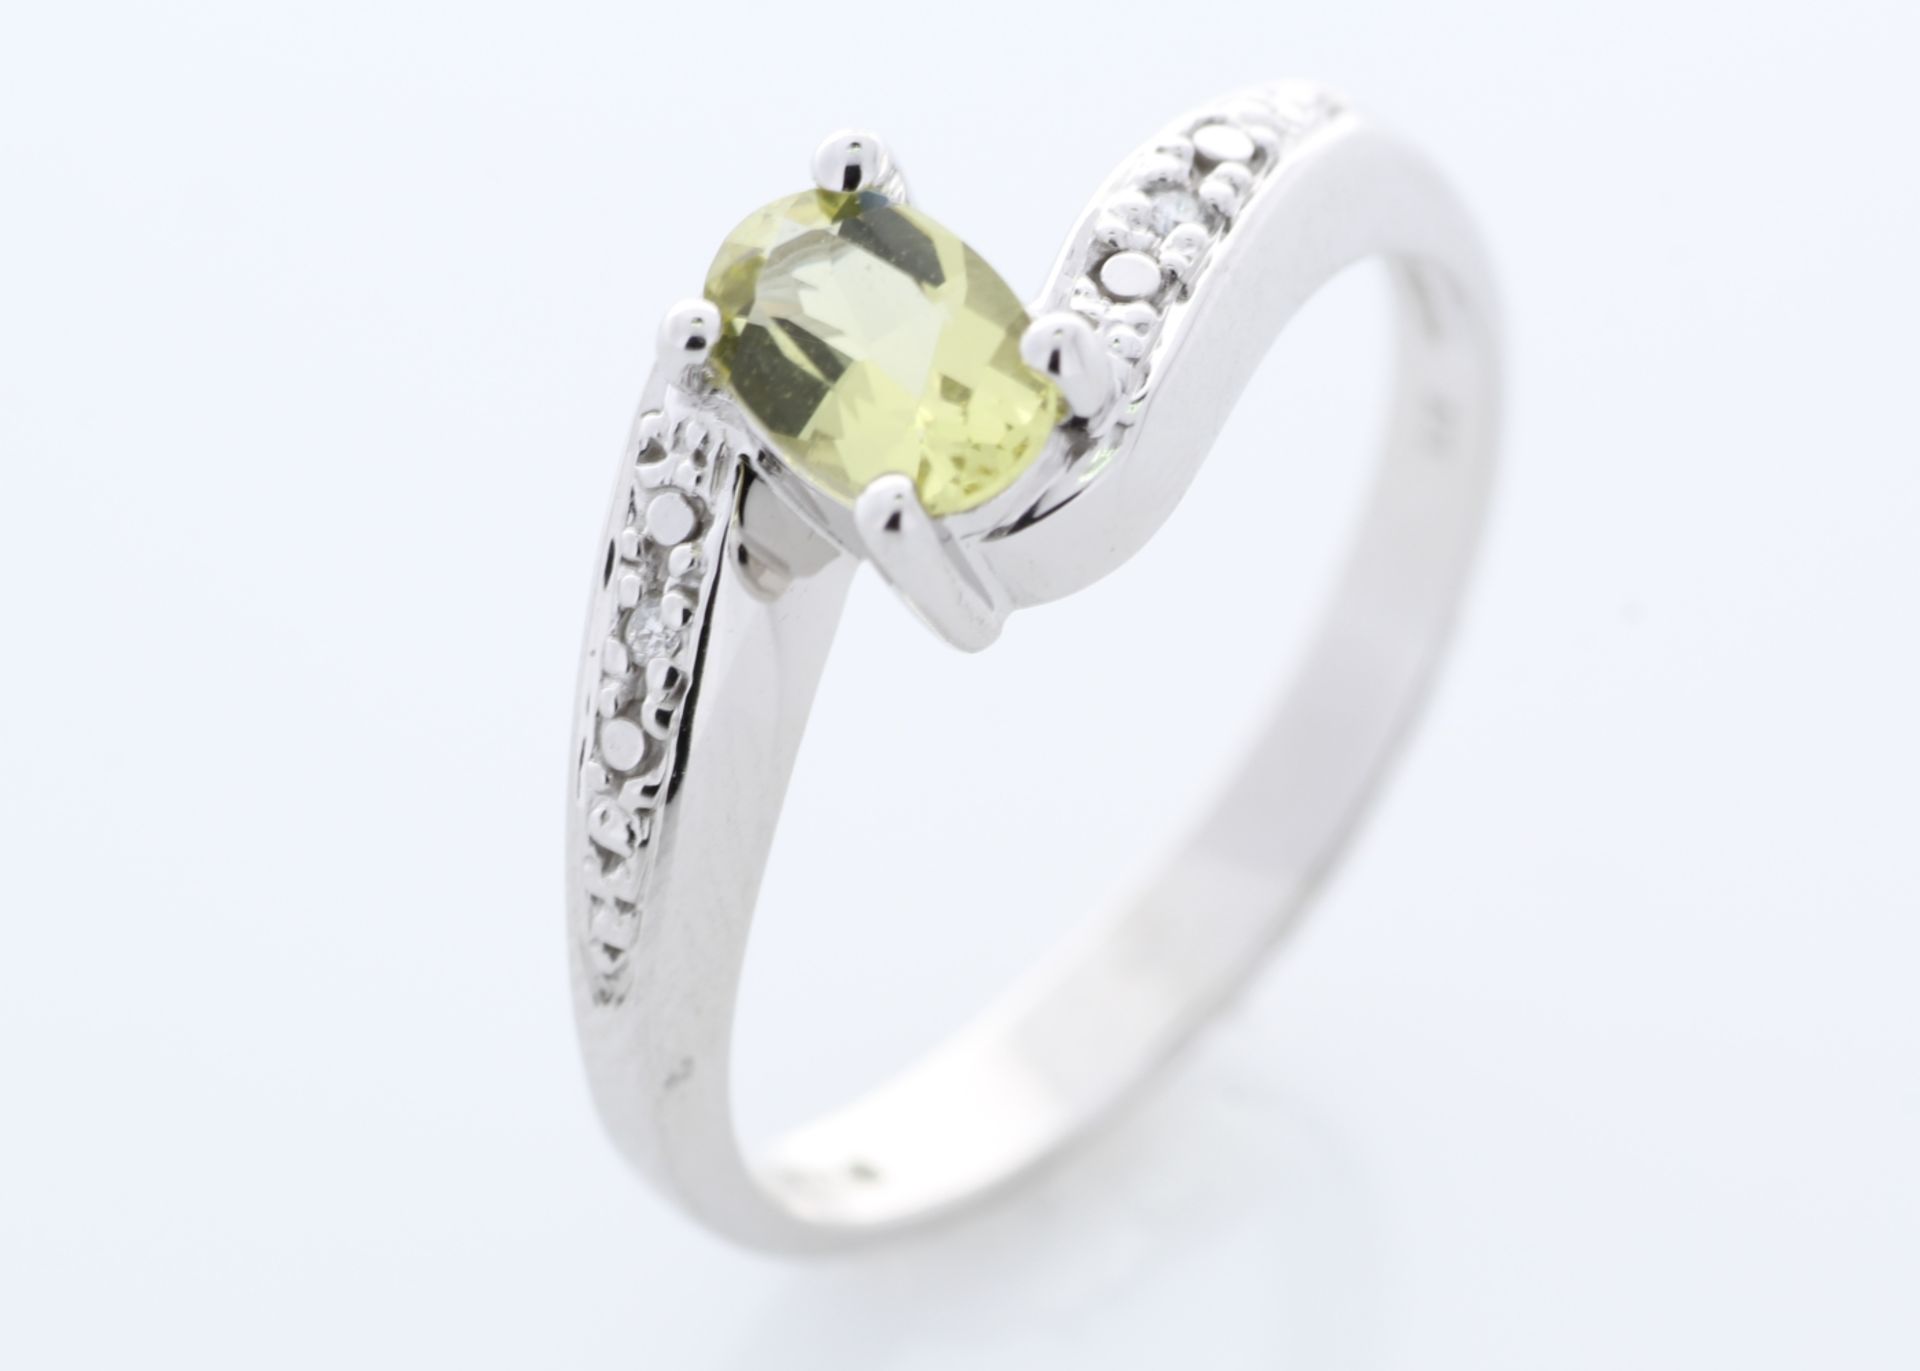 9ct White Gold Diamond And Lemon Quartz Ring 0.01 Carats - Valued by GIE £1,149.00 - 9ct White - Image 7 of 8